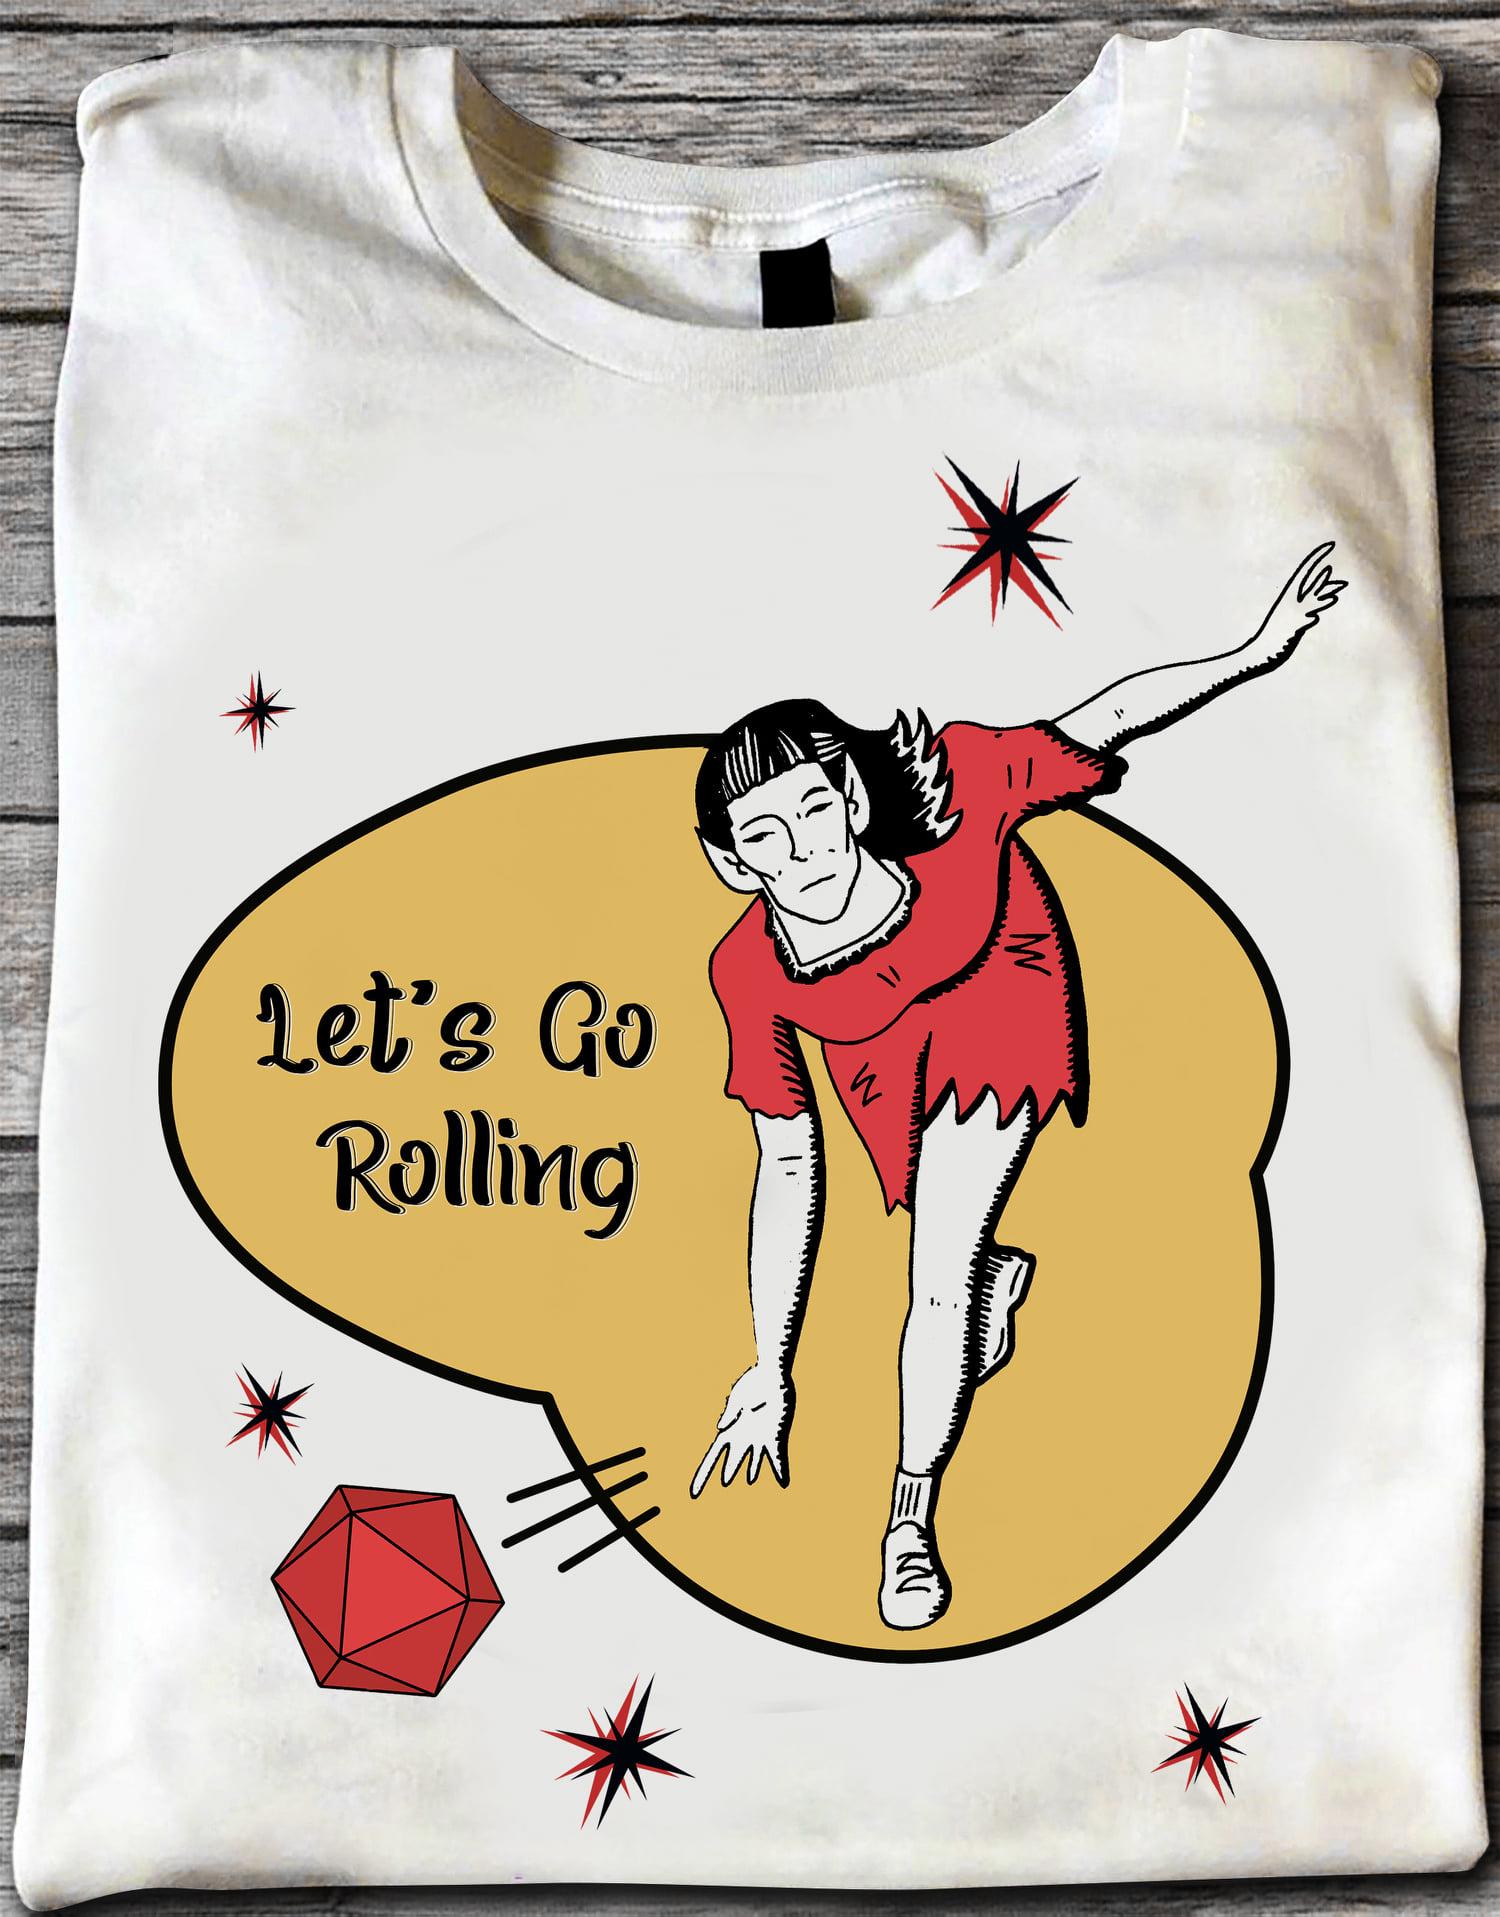 Let's go rolling - Rolling initiative, Dungeons and Dragons